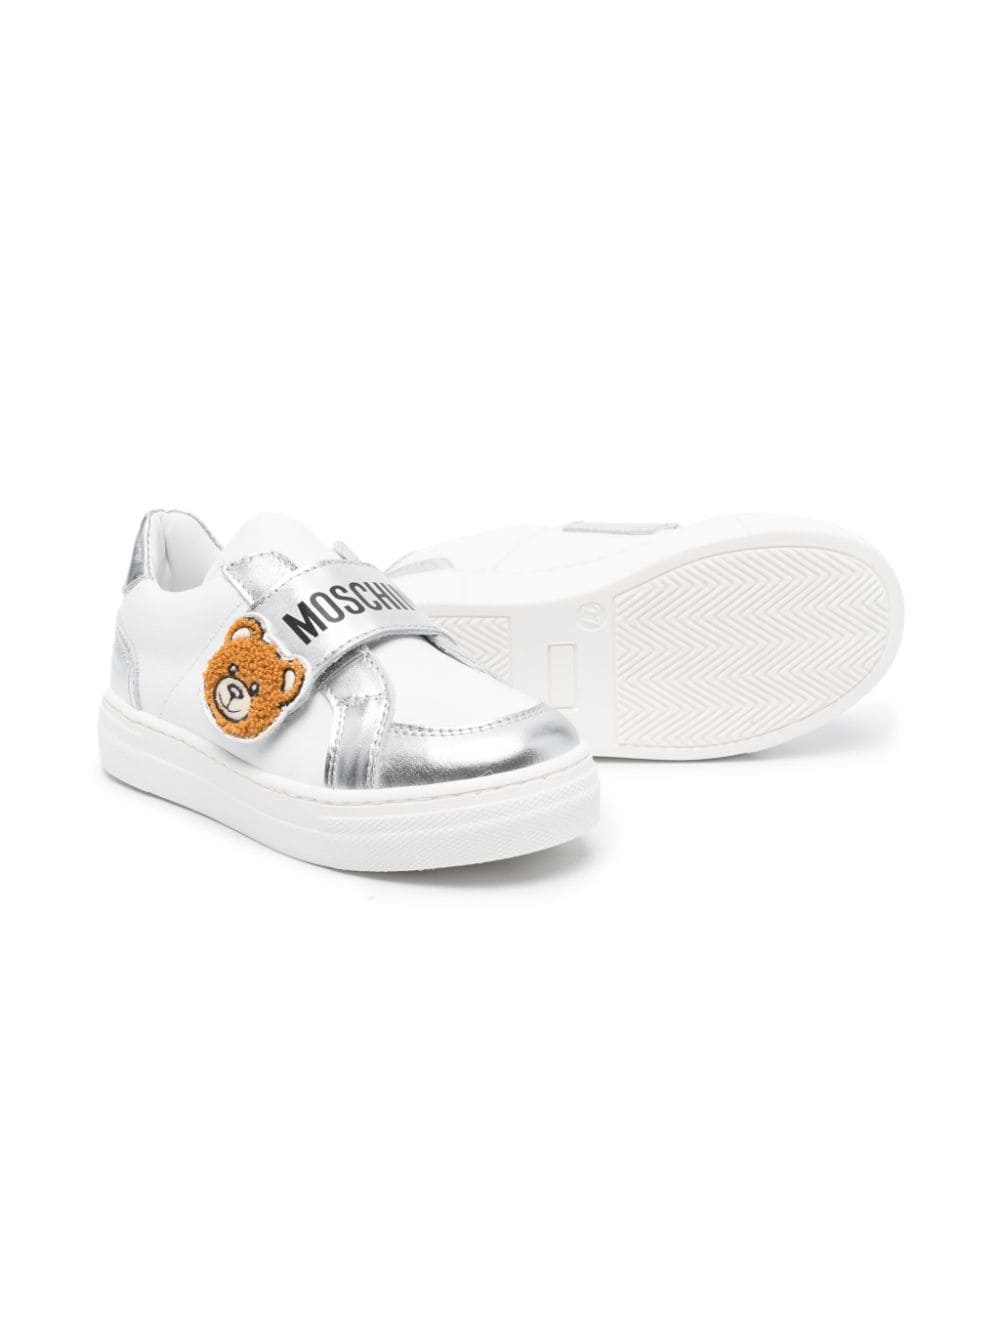 White and silver sneakers for girls